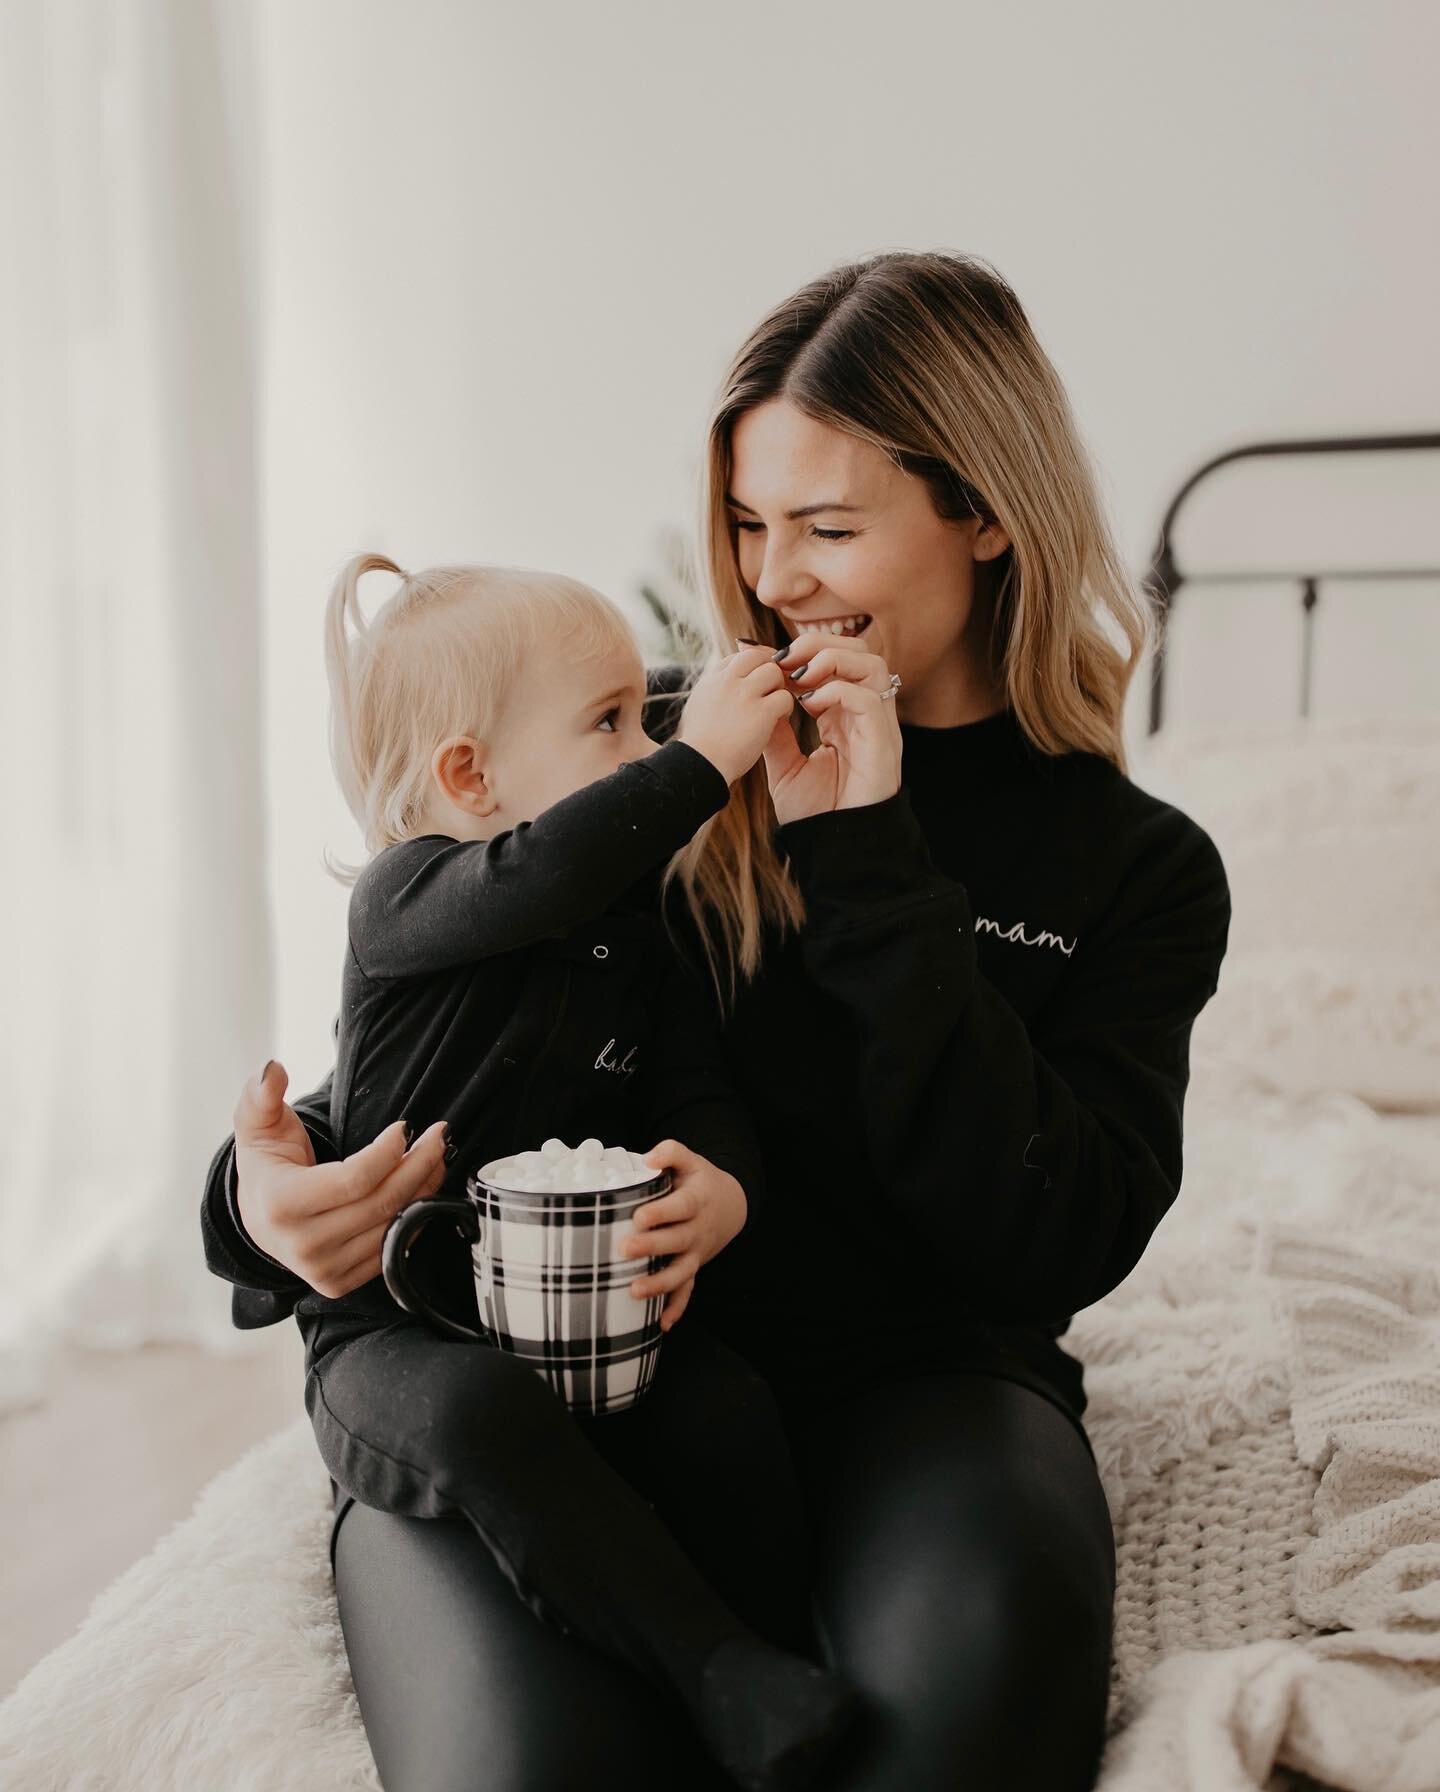 There is nothing better than a basic, neutral fleece. Match your little one this holiday season and beyond. We custom embroidered &ldquo;mama&rdquo; in a white thread giving this comfy sweatshirt a simple but meaningful statement.
⠀⠀⠀⠀⠀⠀⠀⠀⠀
Treat you